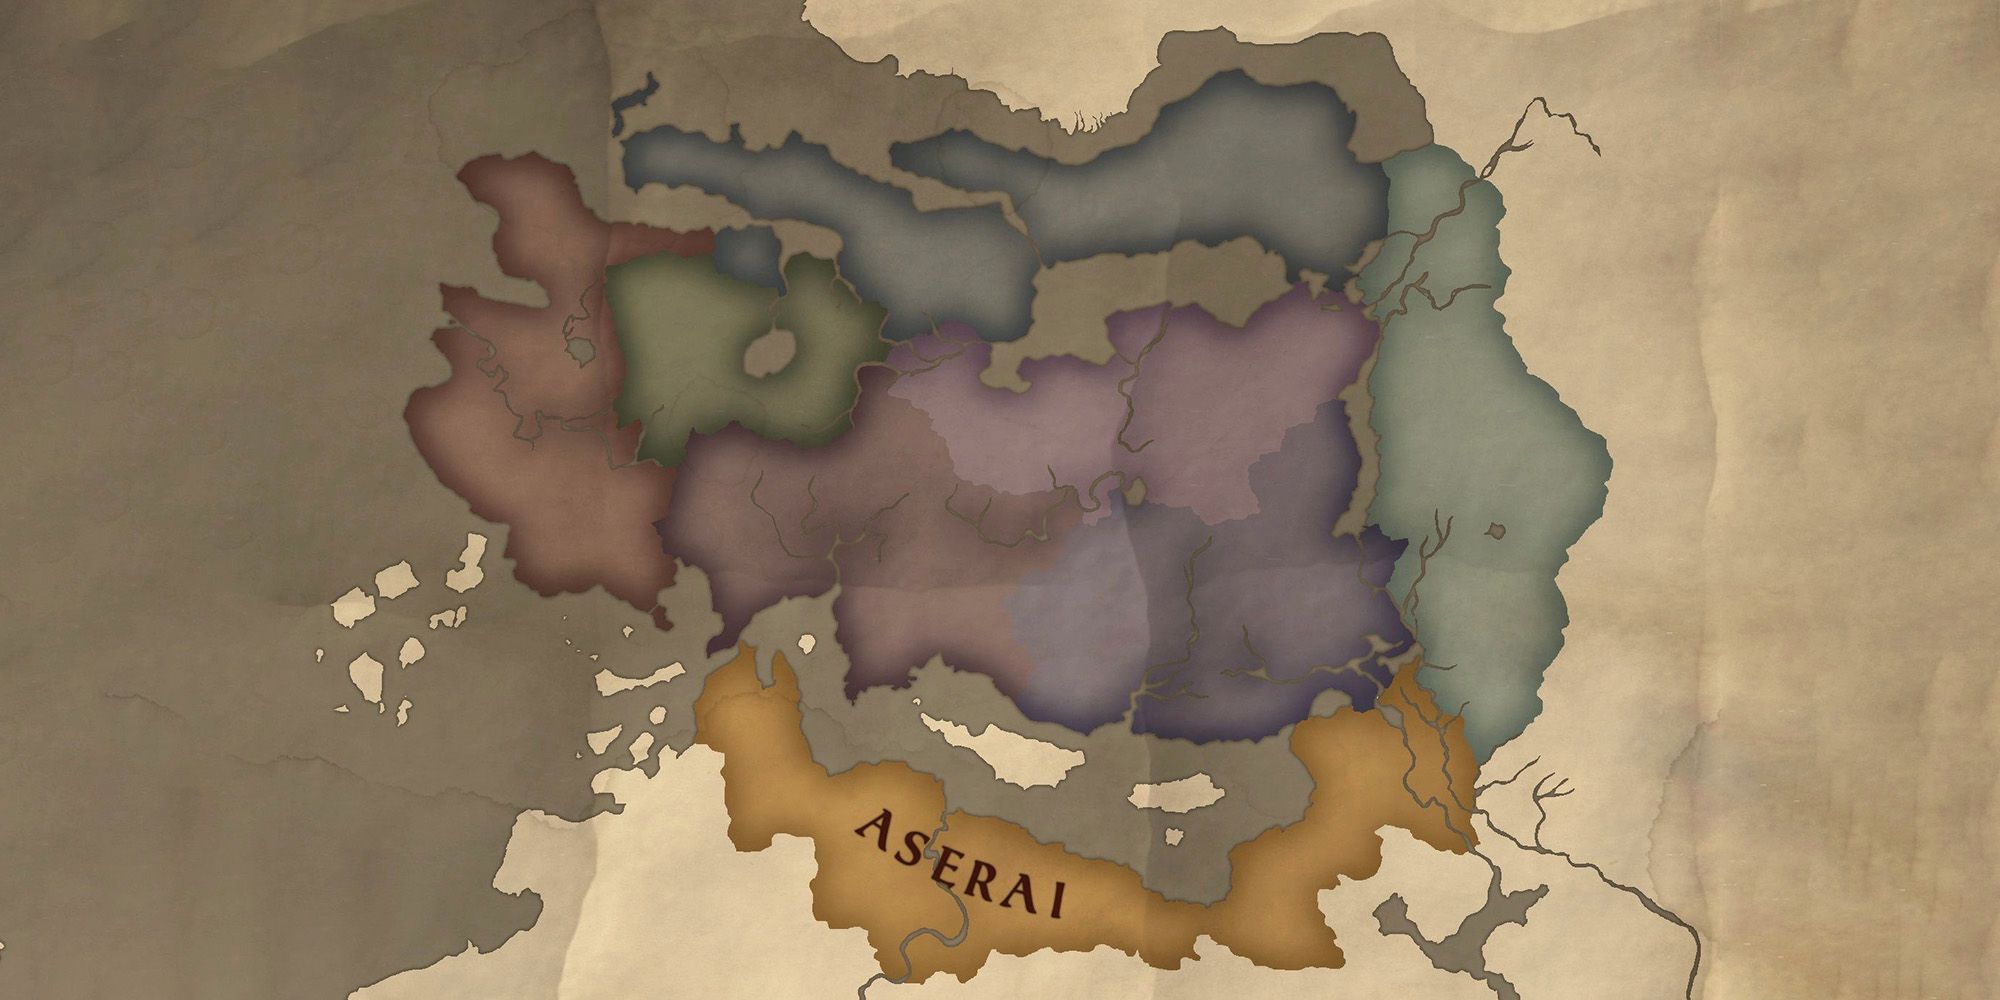 aserai location in mount and blade 2